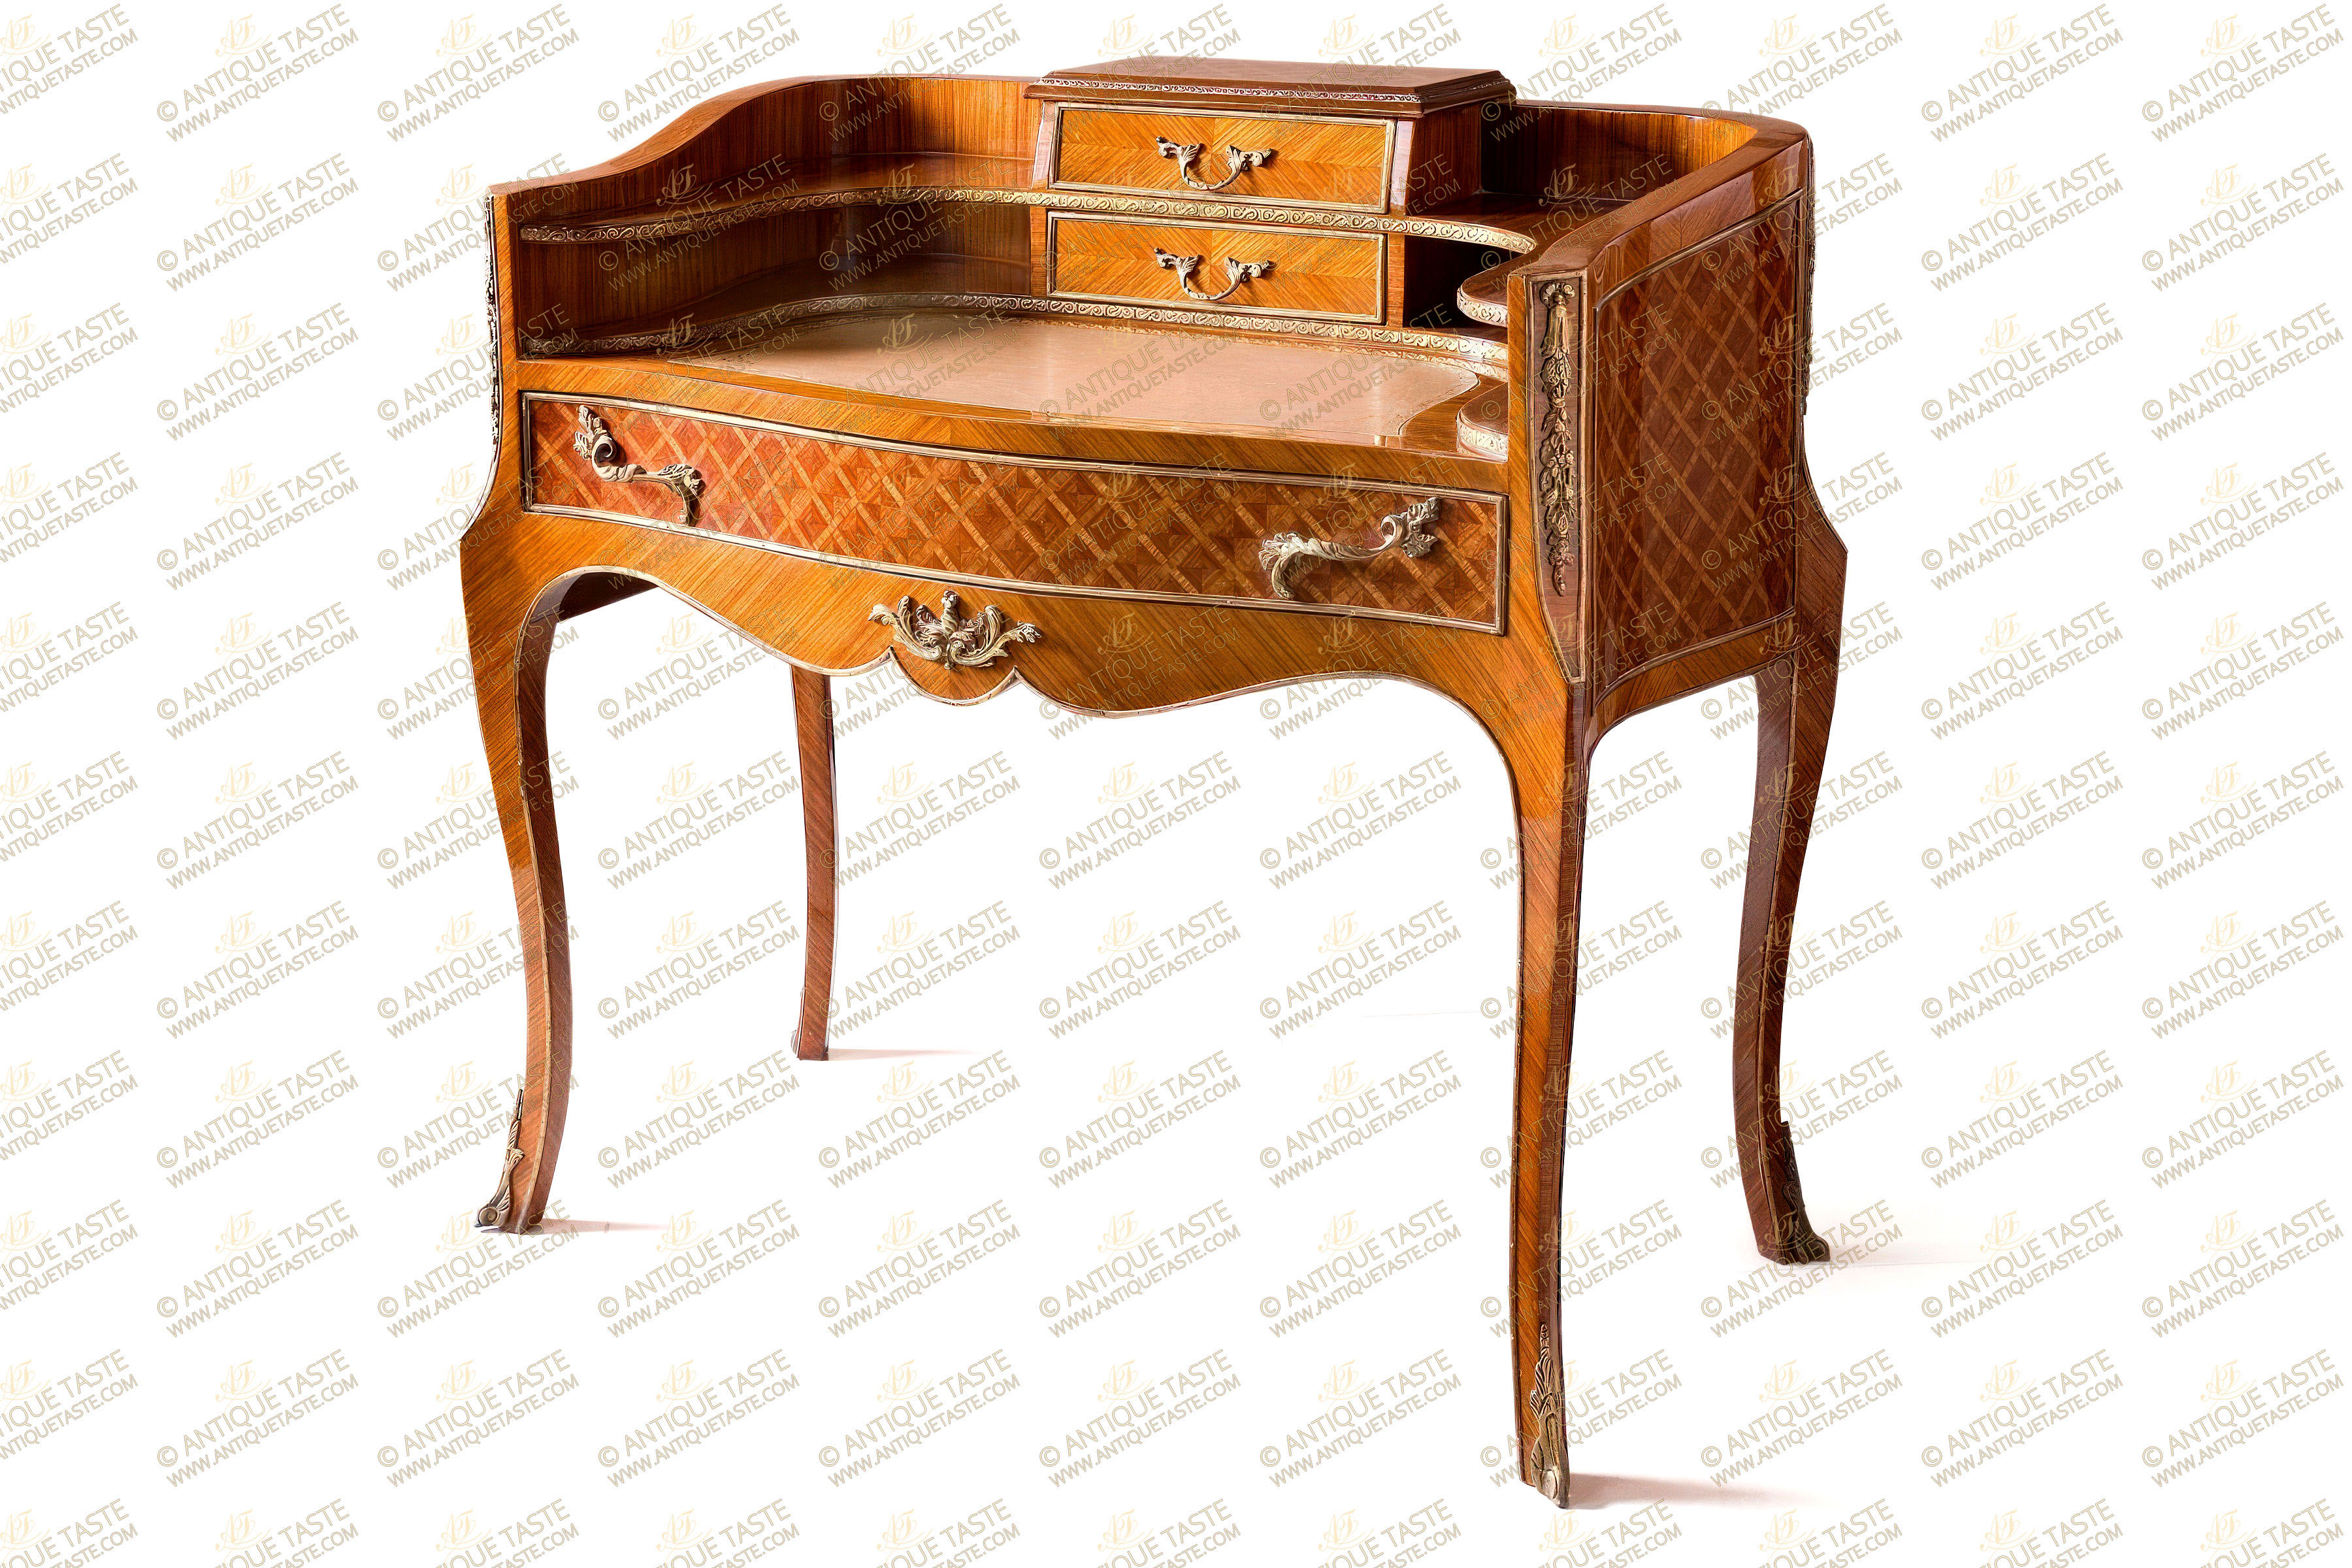 An aesthetic and most delicate French Napoleon III Transitional style ormolu-mounted trellis parquetry and sans-traverse veneer inlaid Bonheur Du Jour Bureau De Dame | Ladies Secretary Desk; The curve-shaped two shelves back ornamented with a hammered ormolu band centered with two small drawers decorated with a gilt-ormolu strip to the front and drape ormolu band the back, upholstered inside in dark red velvet fabric, surmounted with a beveled top inlaid with an ormolu strip; Above is an inset gilt-tooled leather writing surface above a scalloped shaped frieze with a central foliate ormolu mount and housing a wide drawer, upholstered inside in dark red velvet fabric and decorated with two ormolu foliate handles and framed with an ormolu band; The sides, the back and the central wide drawer are inlaid in parquetry style within an ormolu strip. The lower contour of the bureau is bordered with an ormolu filet; The concave-shaped corners with foliage ormolu mounts within an ormolu band, raised on slender splayed cabriole legs terminated with foliate scrolled ormolu sabots.